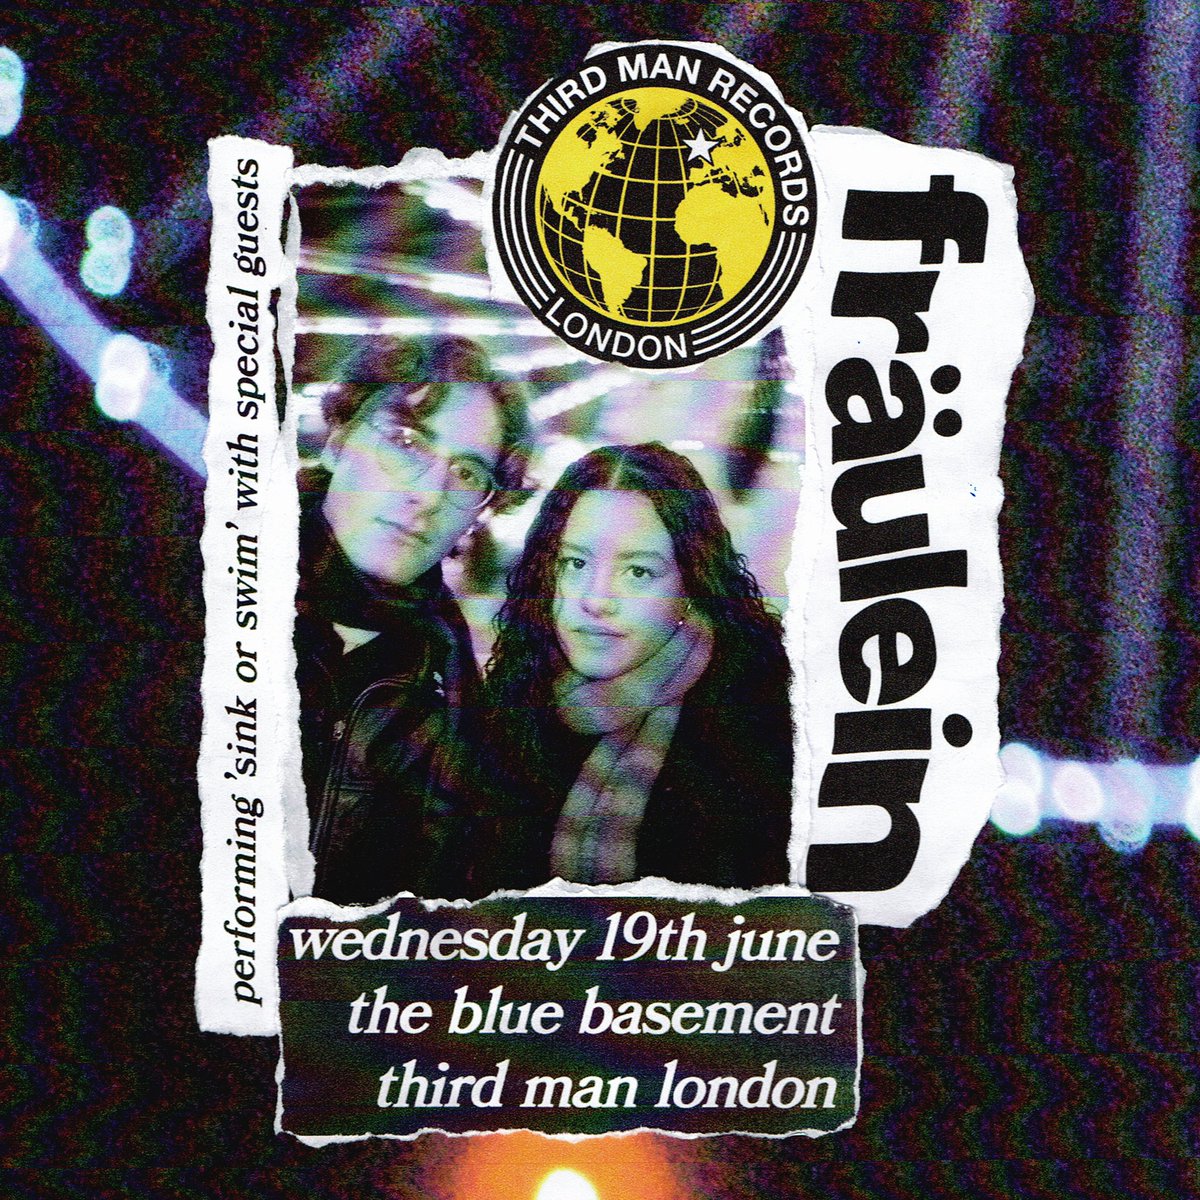 We are playing a mini-album release show at Third Man Records this summer! thirdmanstore.co.uk/products/the-b… On June 19th we play a super special ‘one night only’ set, with special guests @thecosmorat joining us. You’ll get to hear ‘Sink or Swim’ live, in full, plus all the oldies.